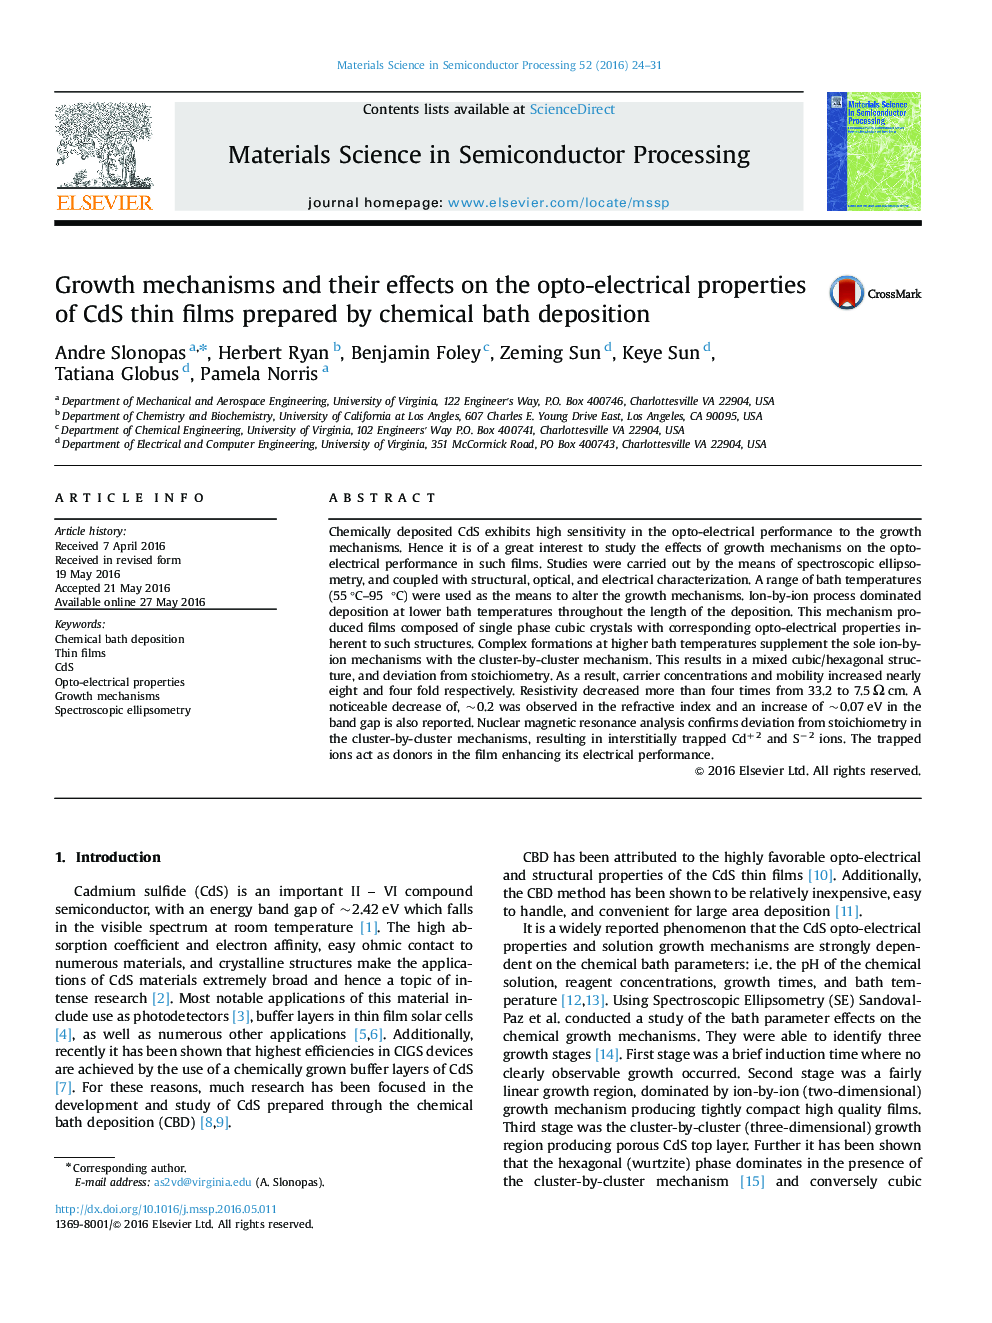 Growth mechanisms and their effects on the opto-electrical properties of CdS thin films prepared by chemical bath deposition